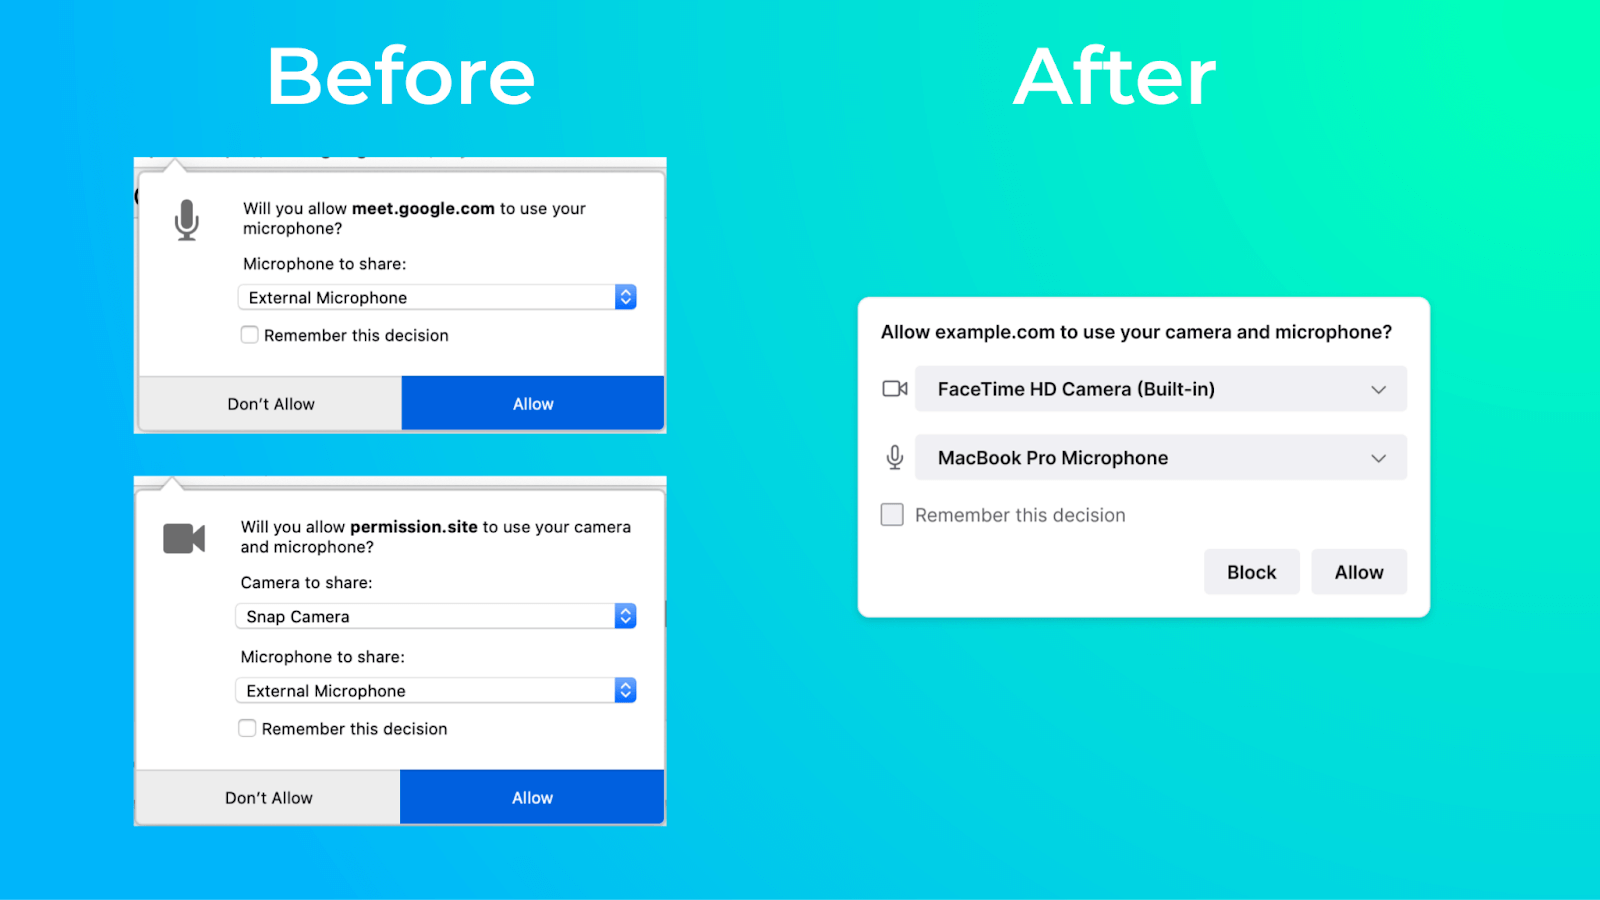 Notification control changes in Firefox redesign